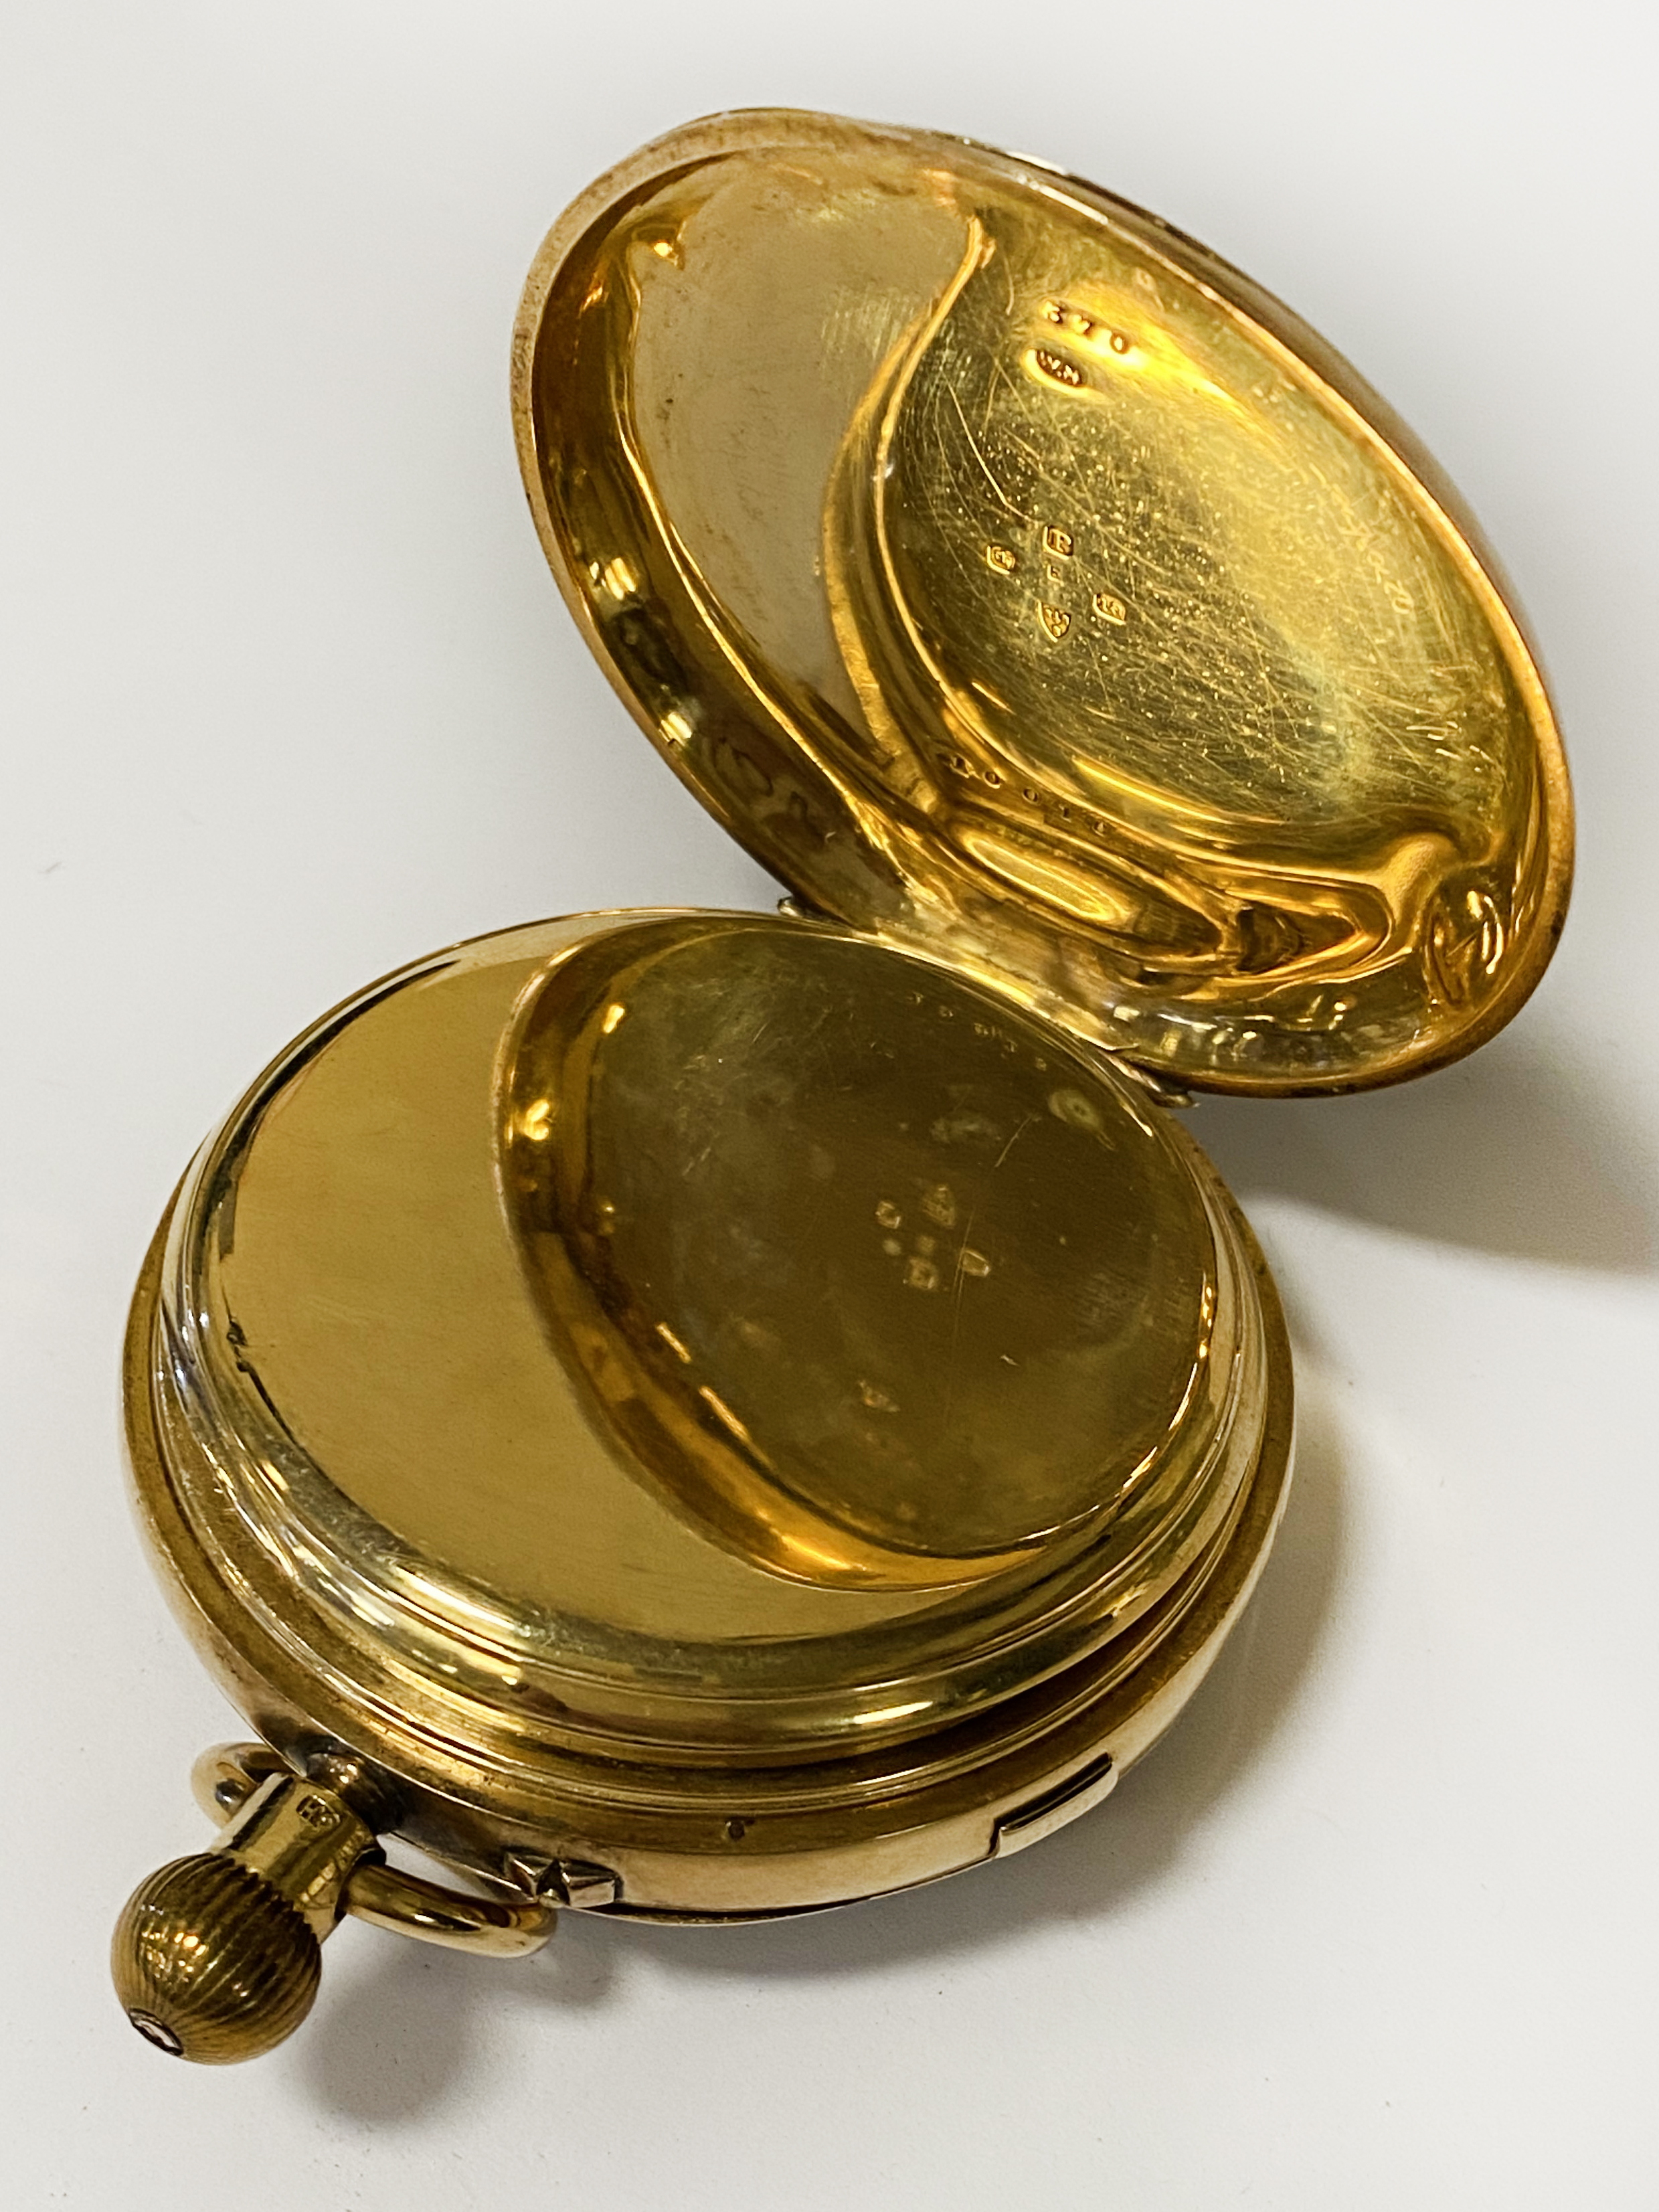 18 CT. GOLD POCKET WATCH - Image 3 of 4